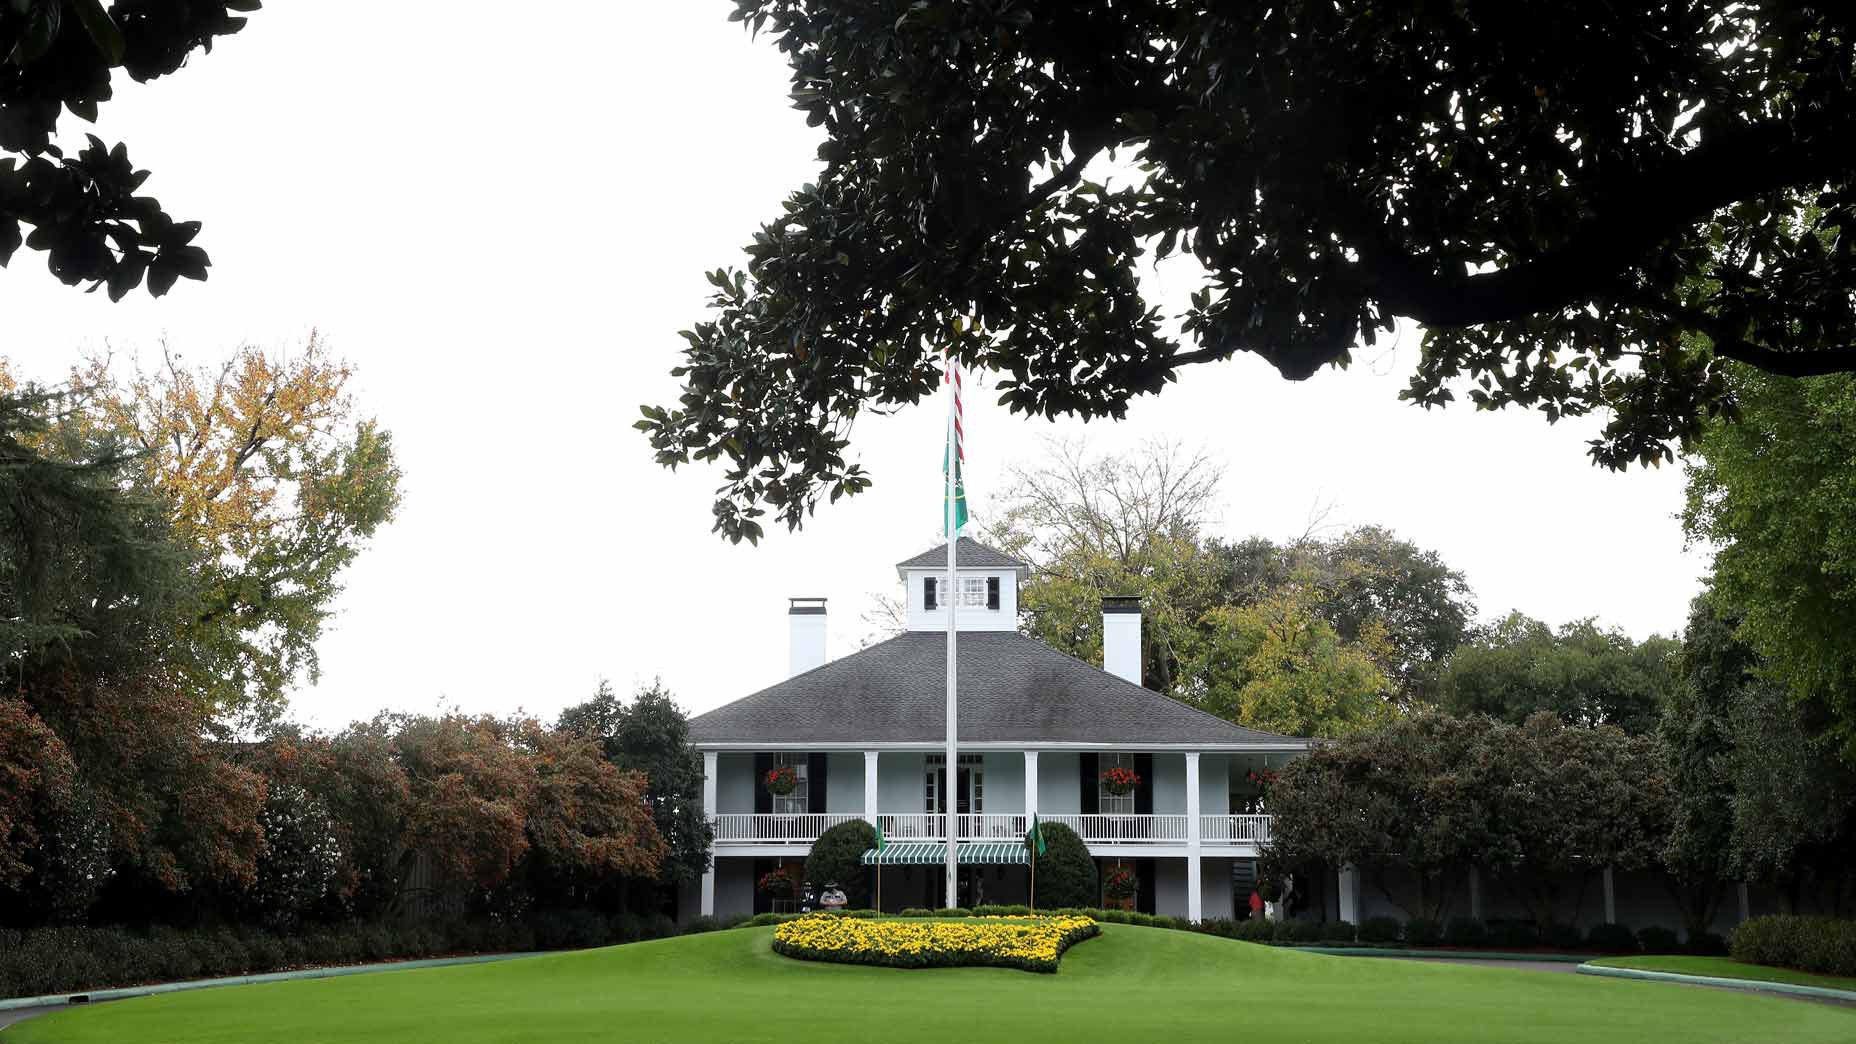 Masters payout hits record $18 million with 3.24 million to winner